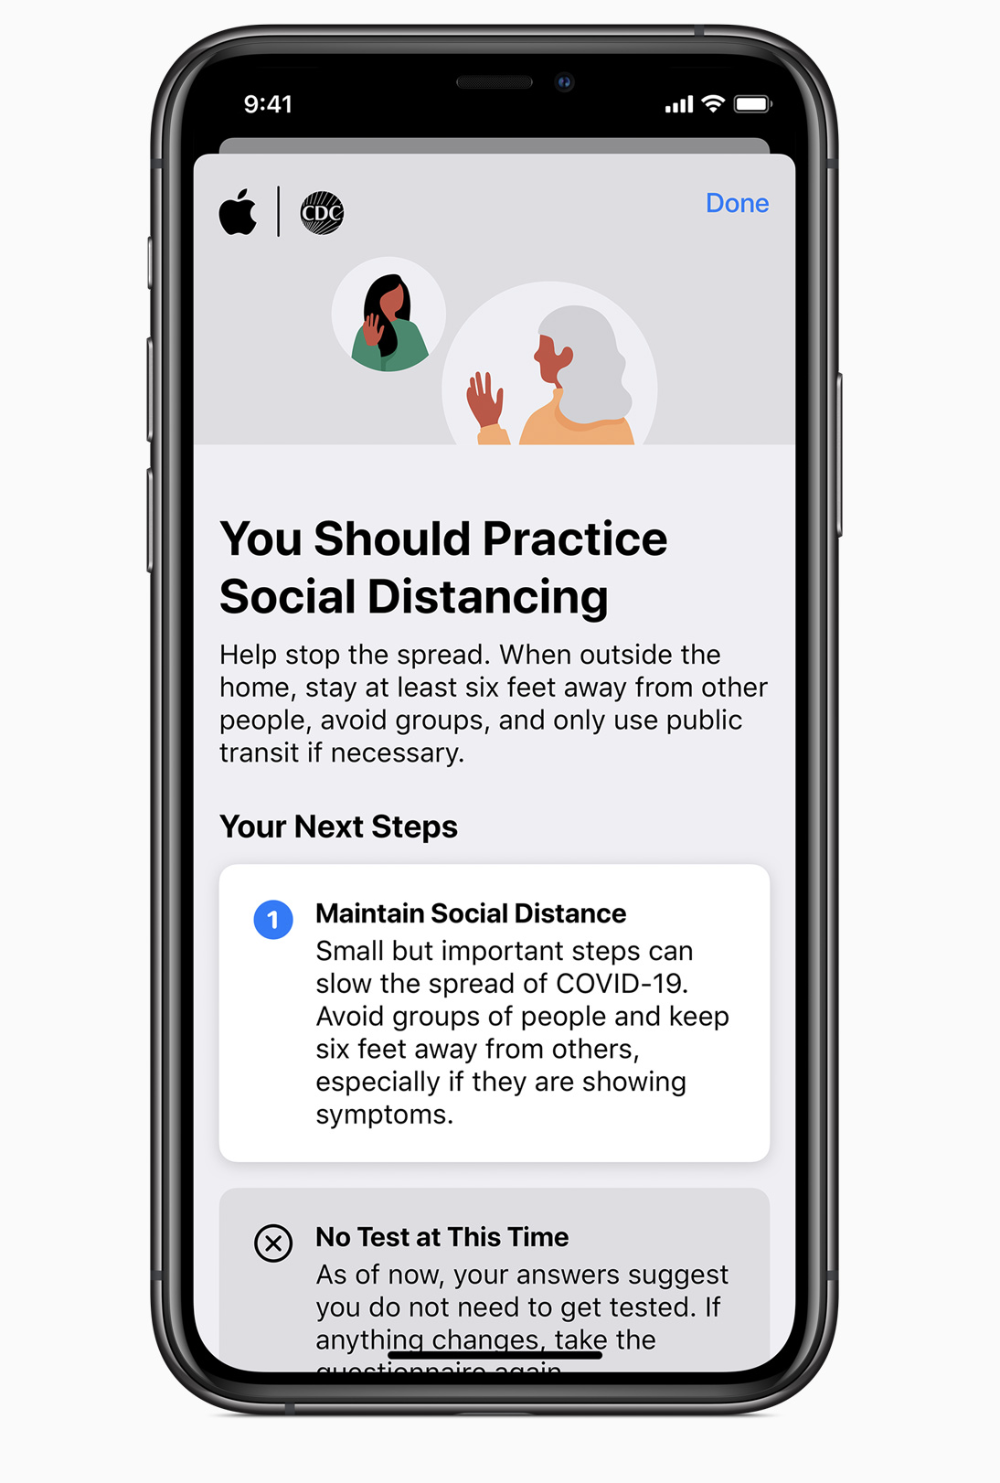 Apple releases new COVID-19 app, website based on CDC guidance